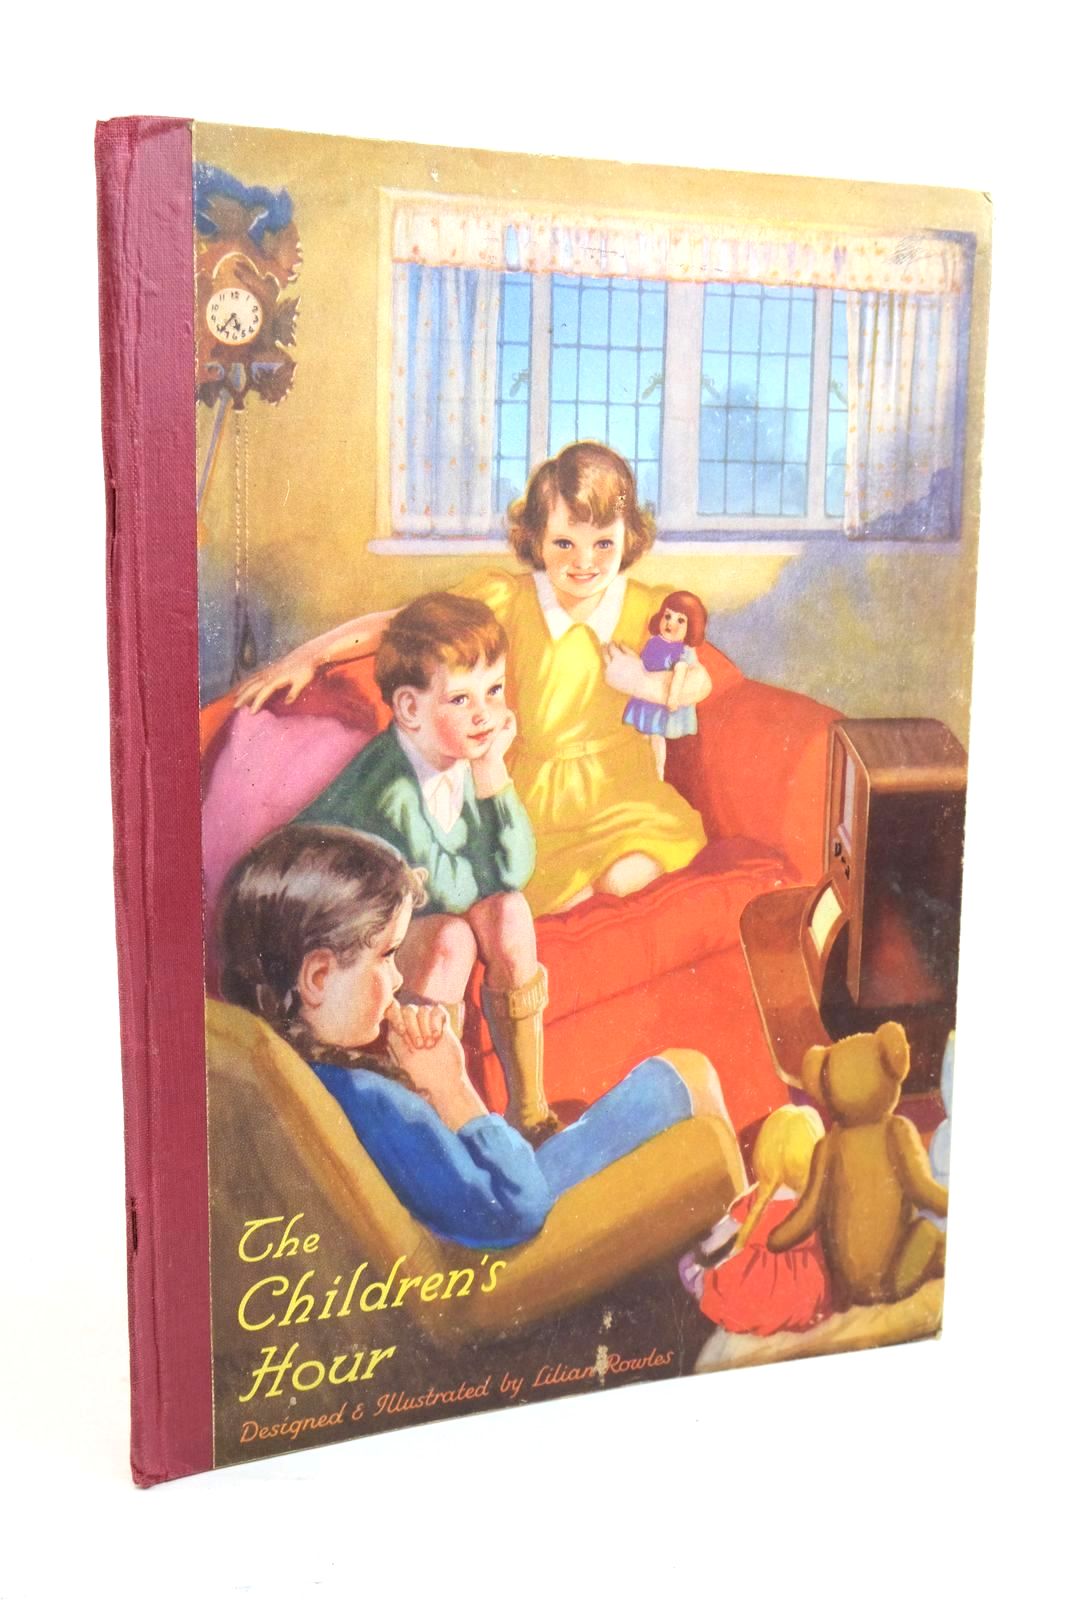 Photo of THE CHILDREN'S HOUR written by Rowles, Lilian illustrated by Rowles, Lilian published by W.H.C. London (STOCK CODE: 1321164)  for sale by Stella & Rose's Books